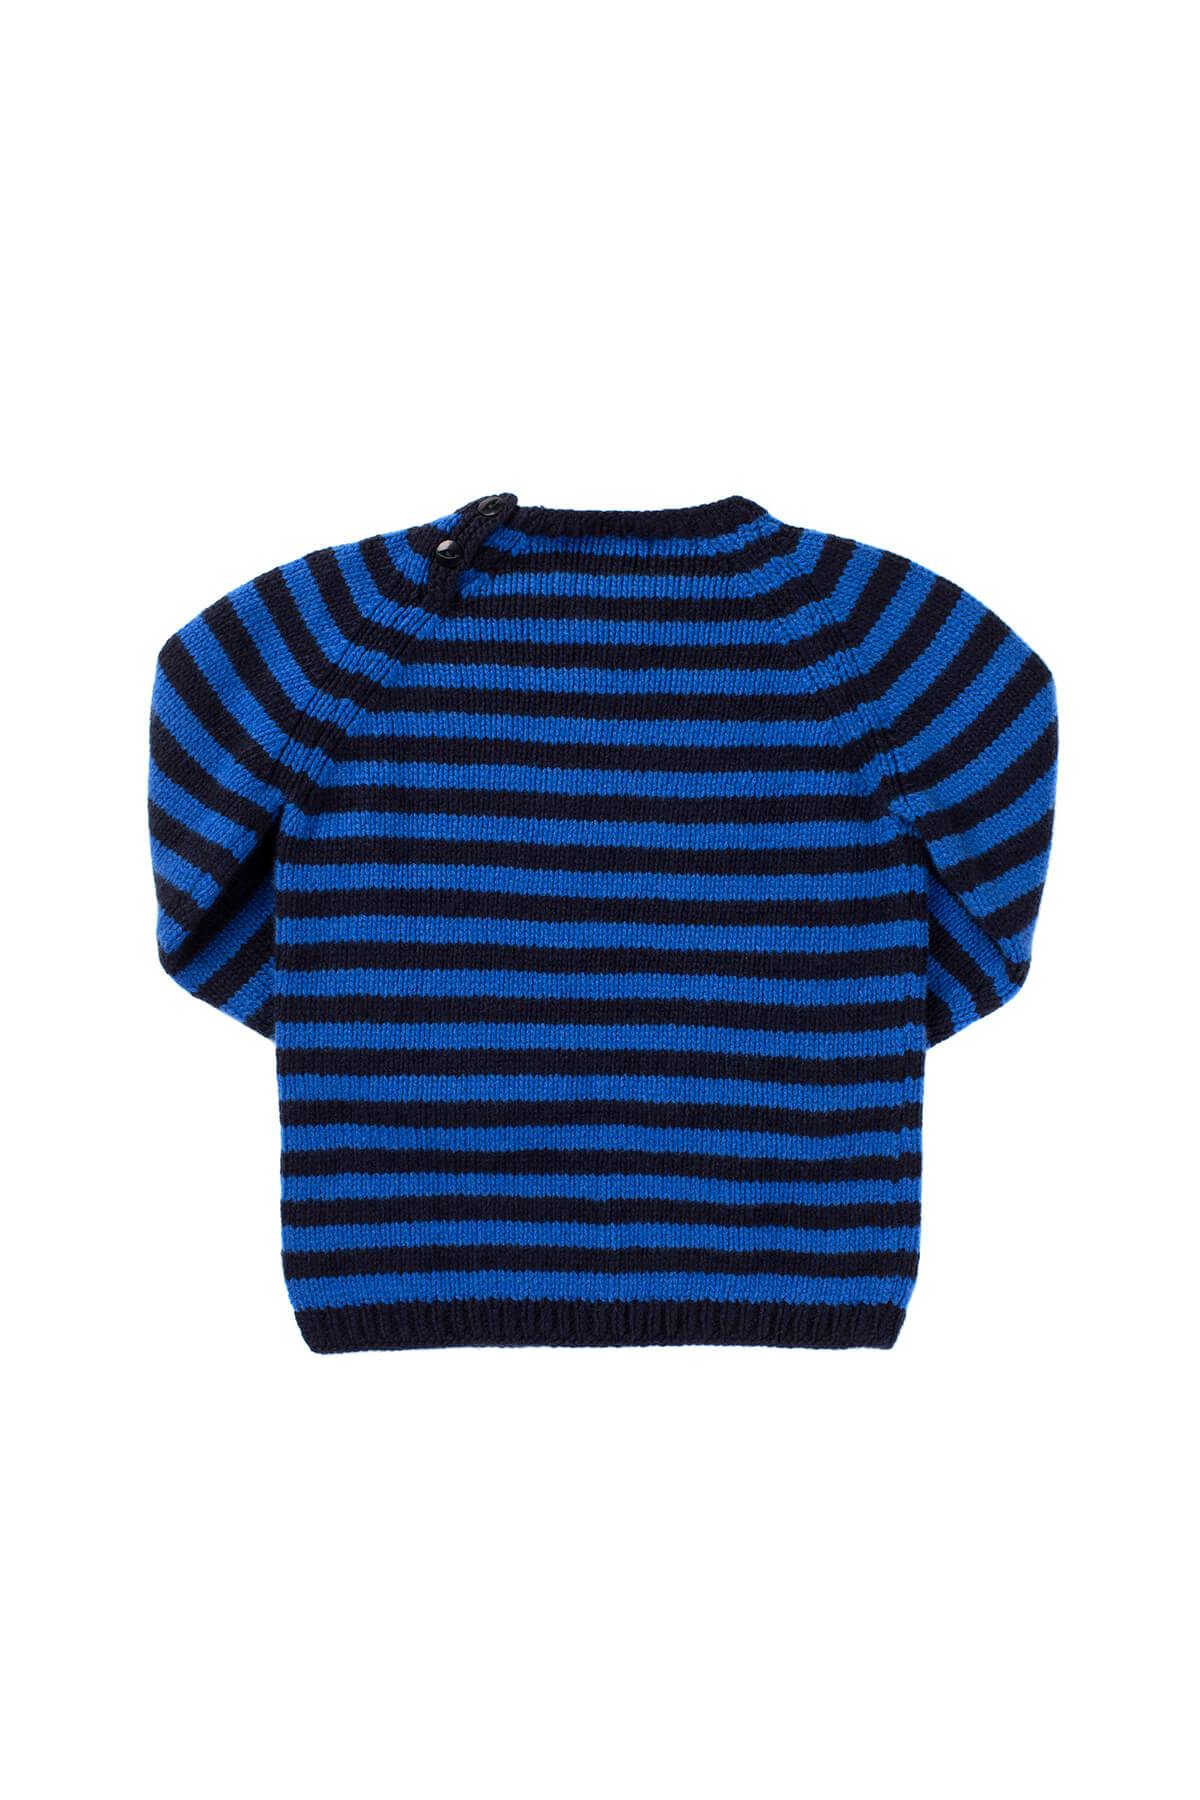 Back of Johnstons of Elgin Stripy Hand Knitted Children's Cashmere Jumper in Navy & Bright Blue on white background 76199ZZZ107